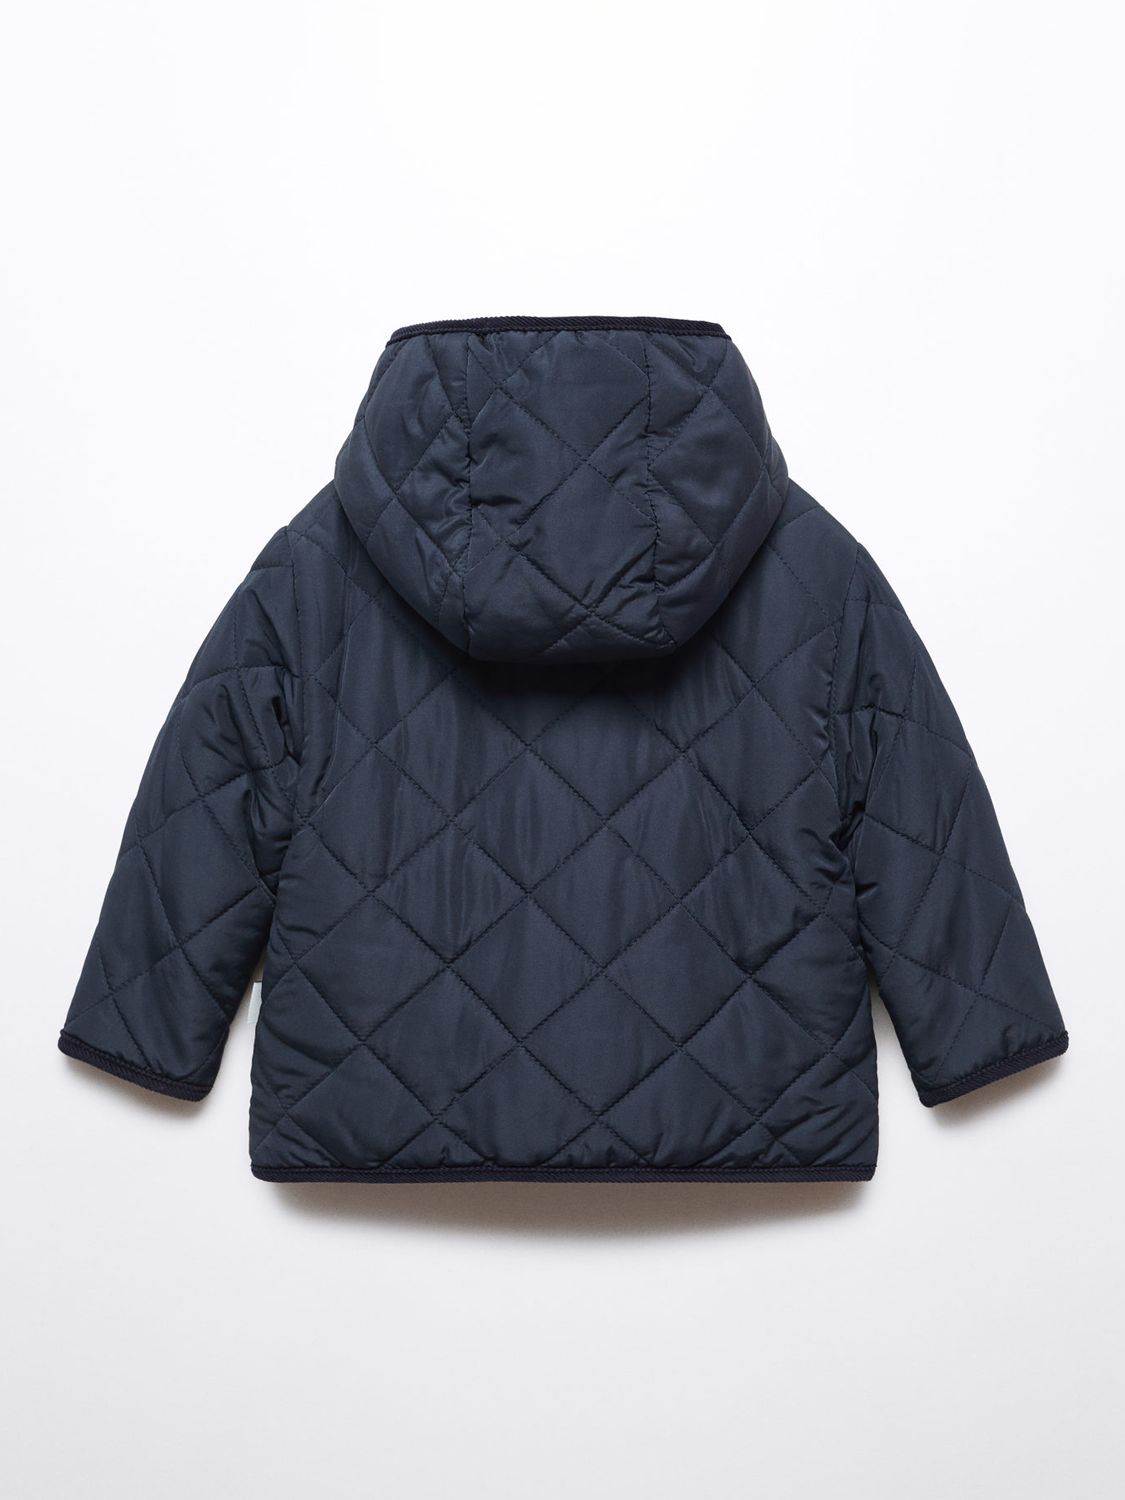 Mango Baby Husky Hooded Quilted Jacket, Navy, 12-18 months